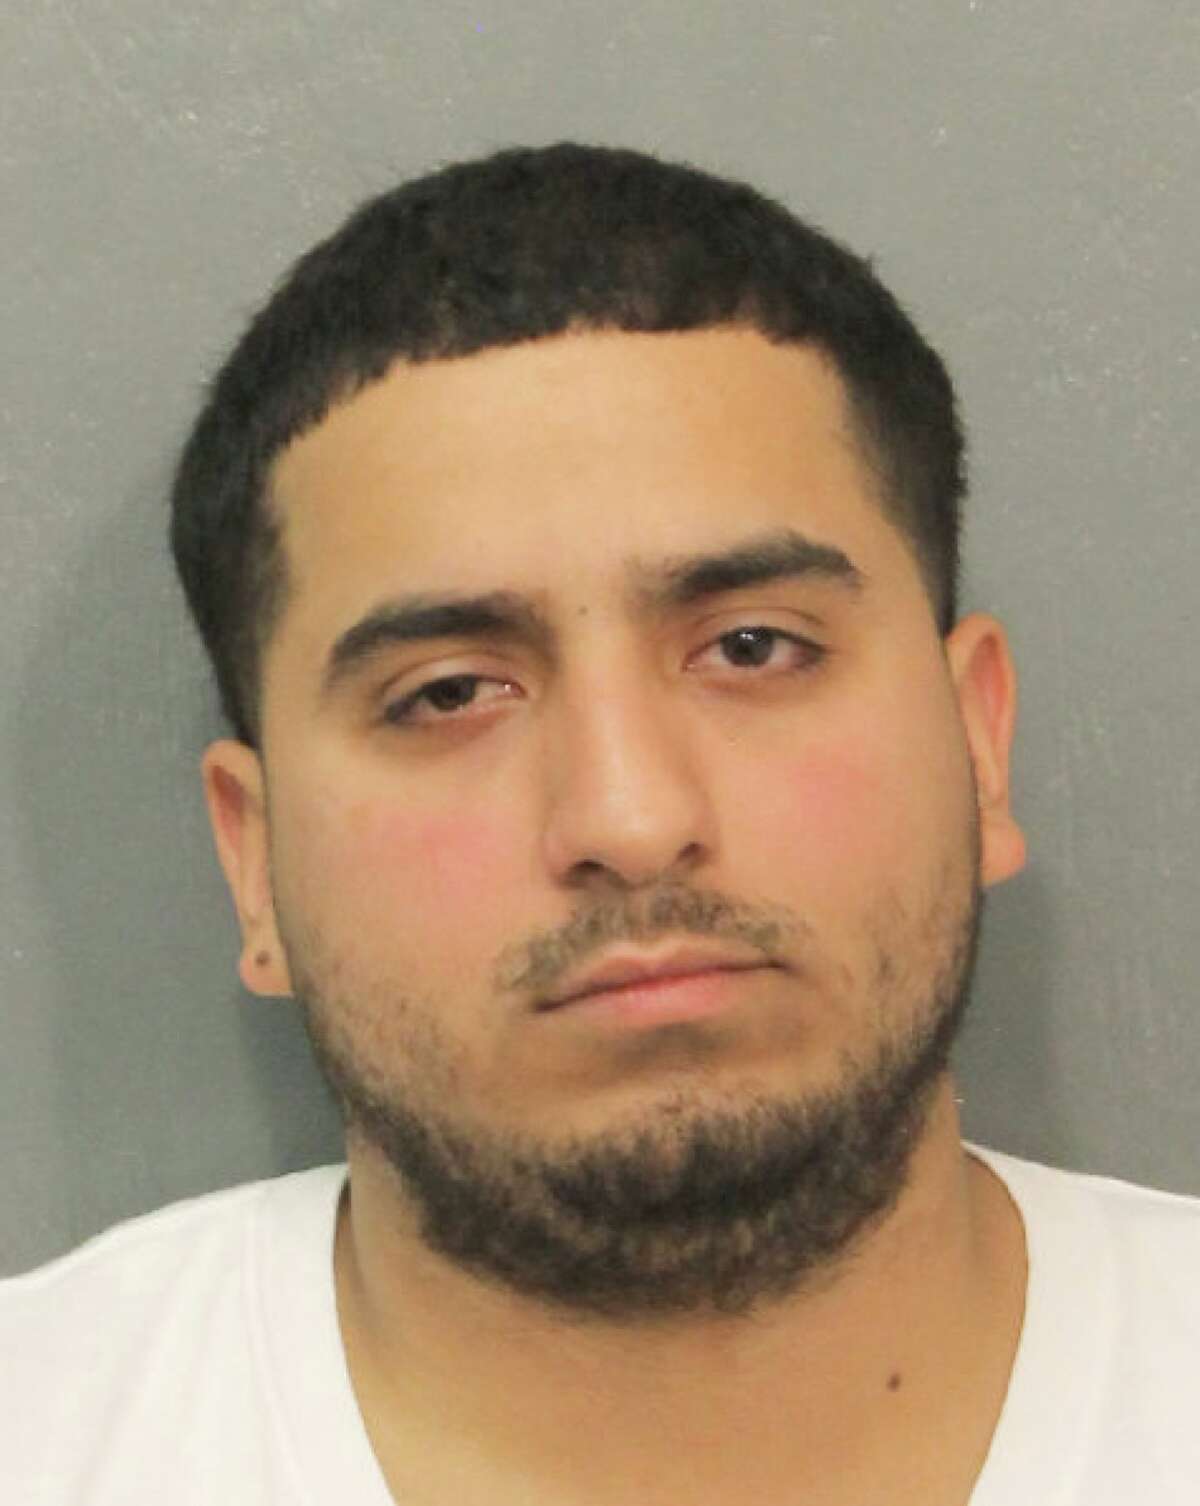 Rene Davila Wanted for injury to a child causing serious bodily injury Age: 26 Height: 5 feet, 4 inches Brown eyes, brown hair Last known location: Channelview Anyone with information about this person is urged to call Houston Crime Stoppers at 713-222-TIPS (8477).